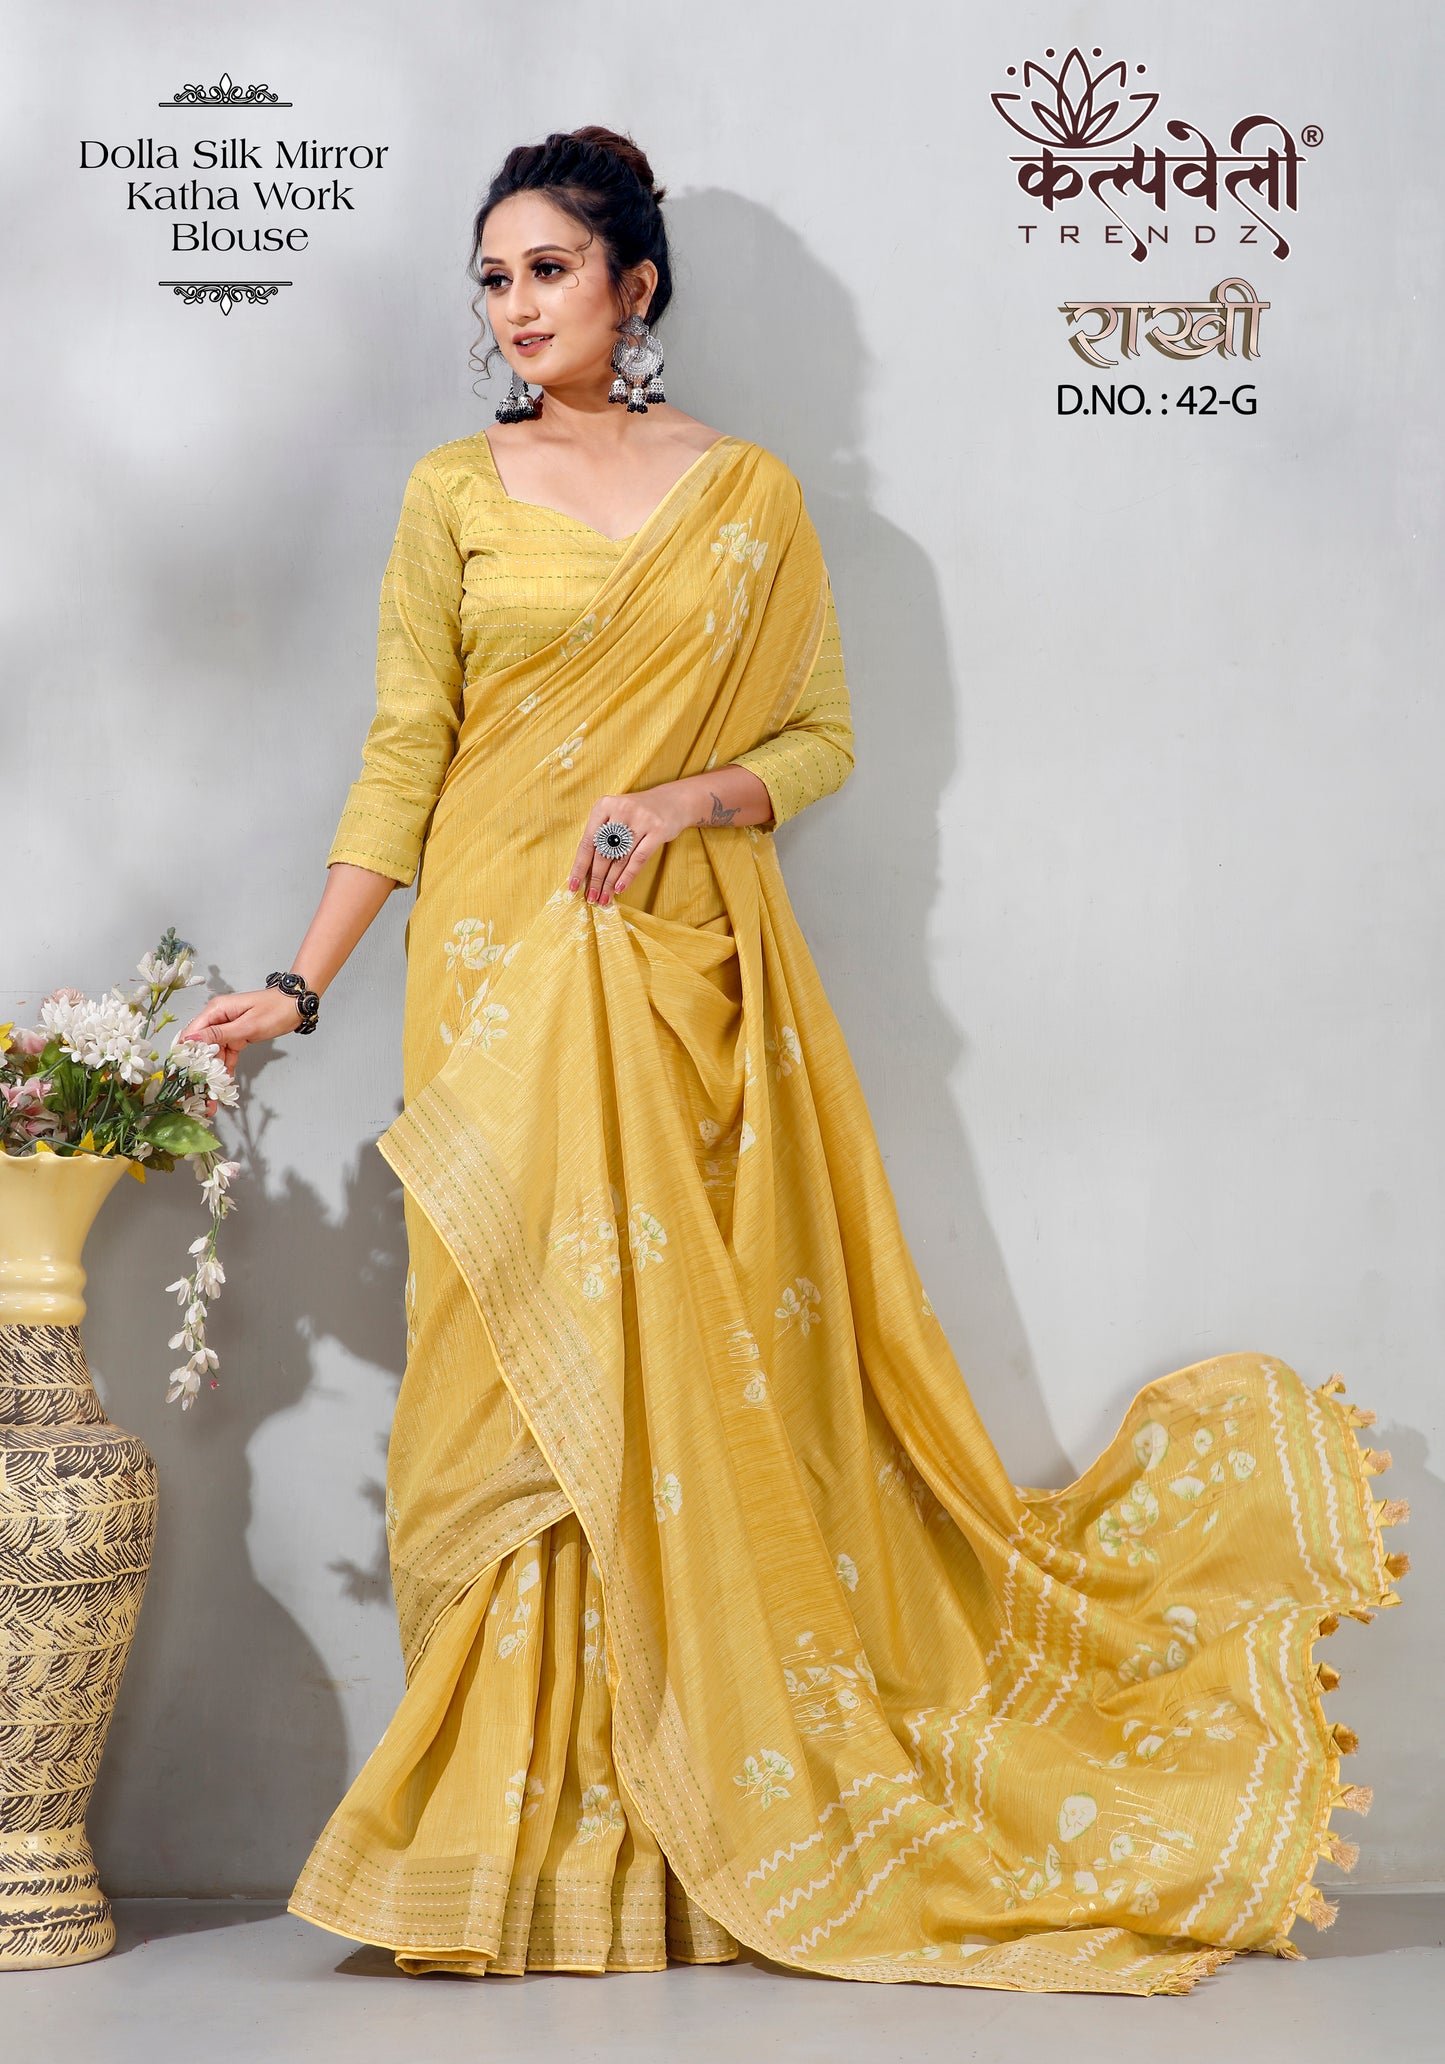 Indian Yellow Colour Dola Silk Saree With Work of mirror Border And Blouse of katha Work